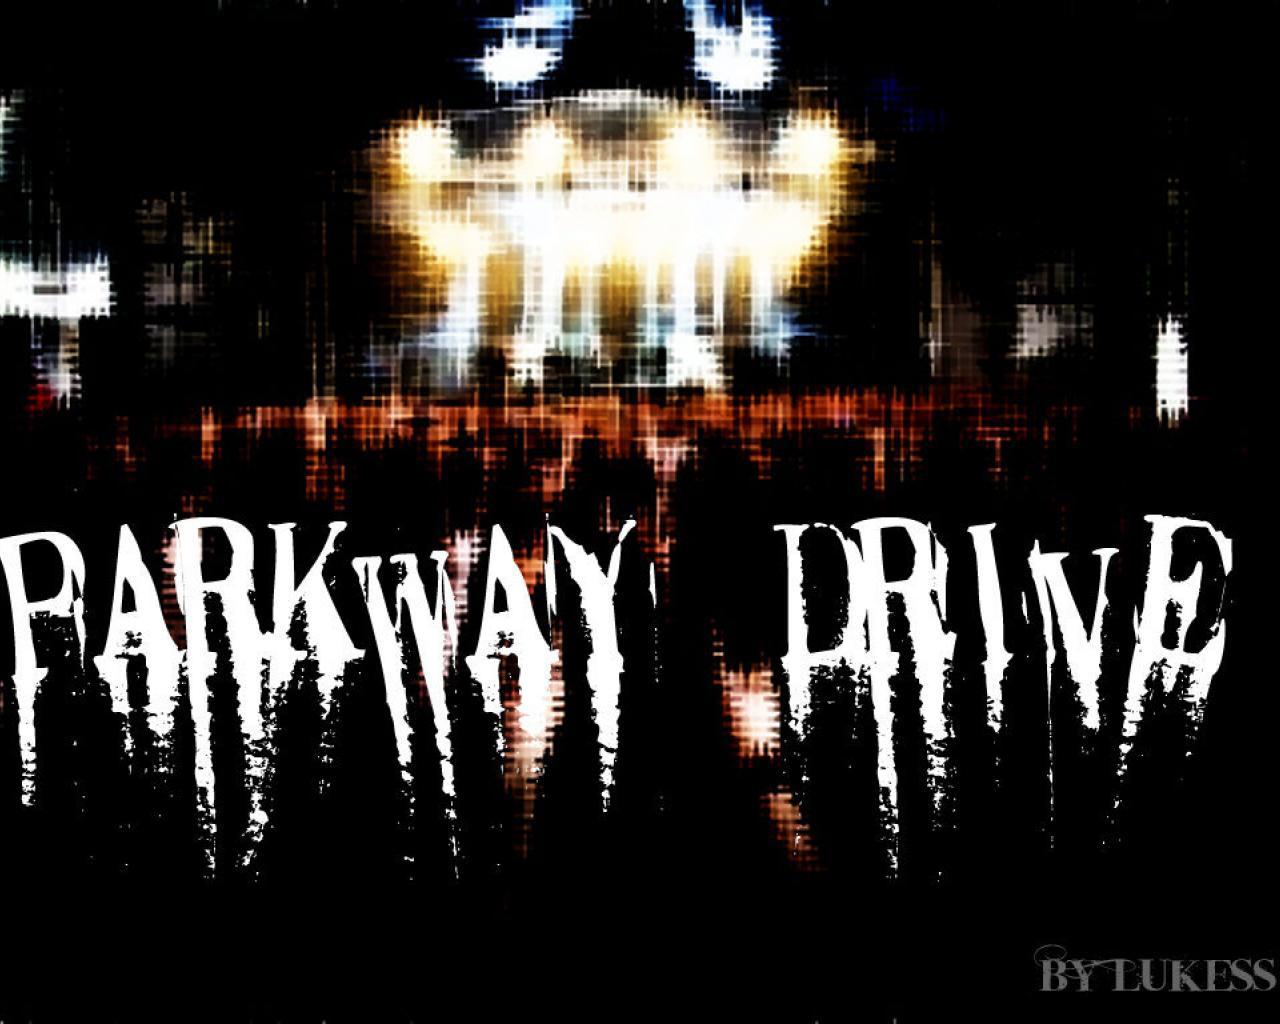 New Parkway Drive